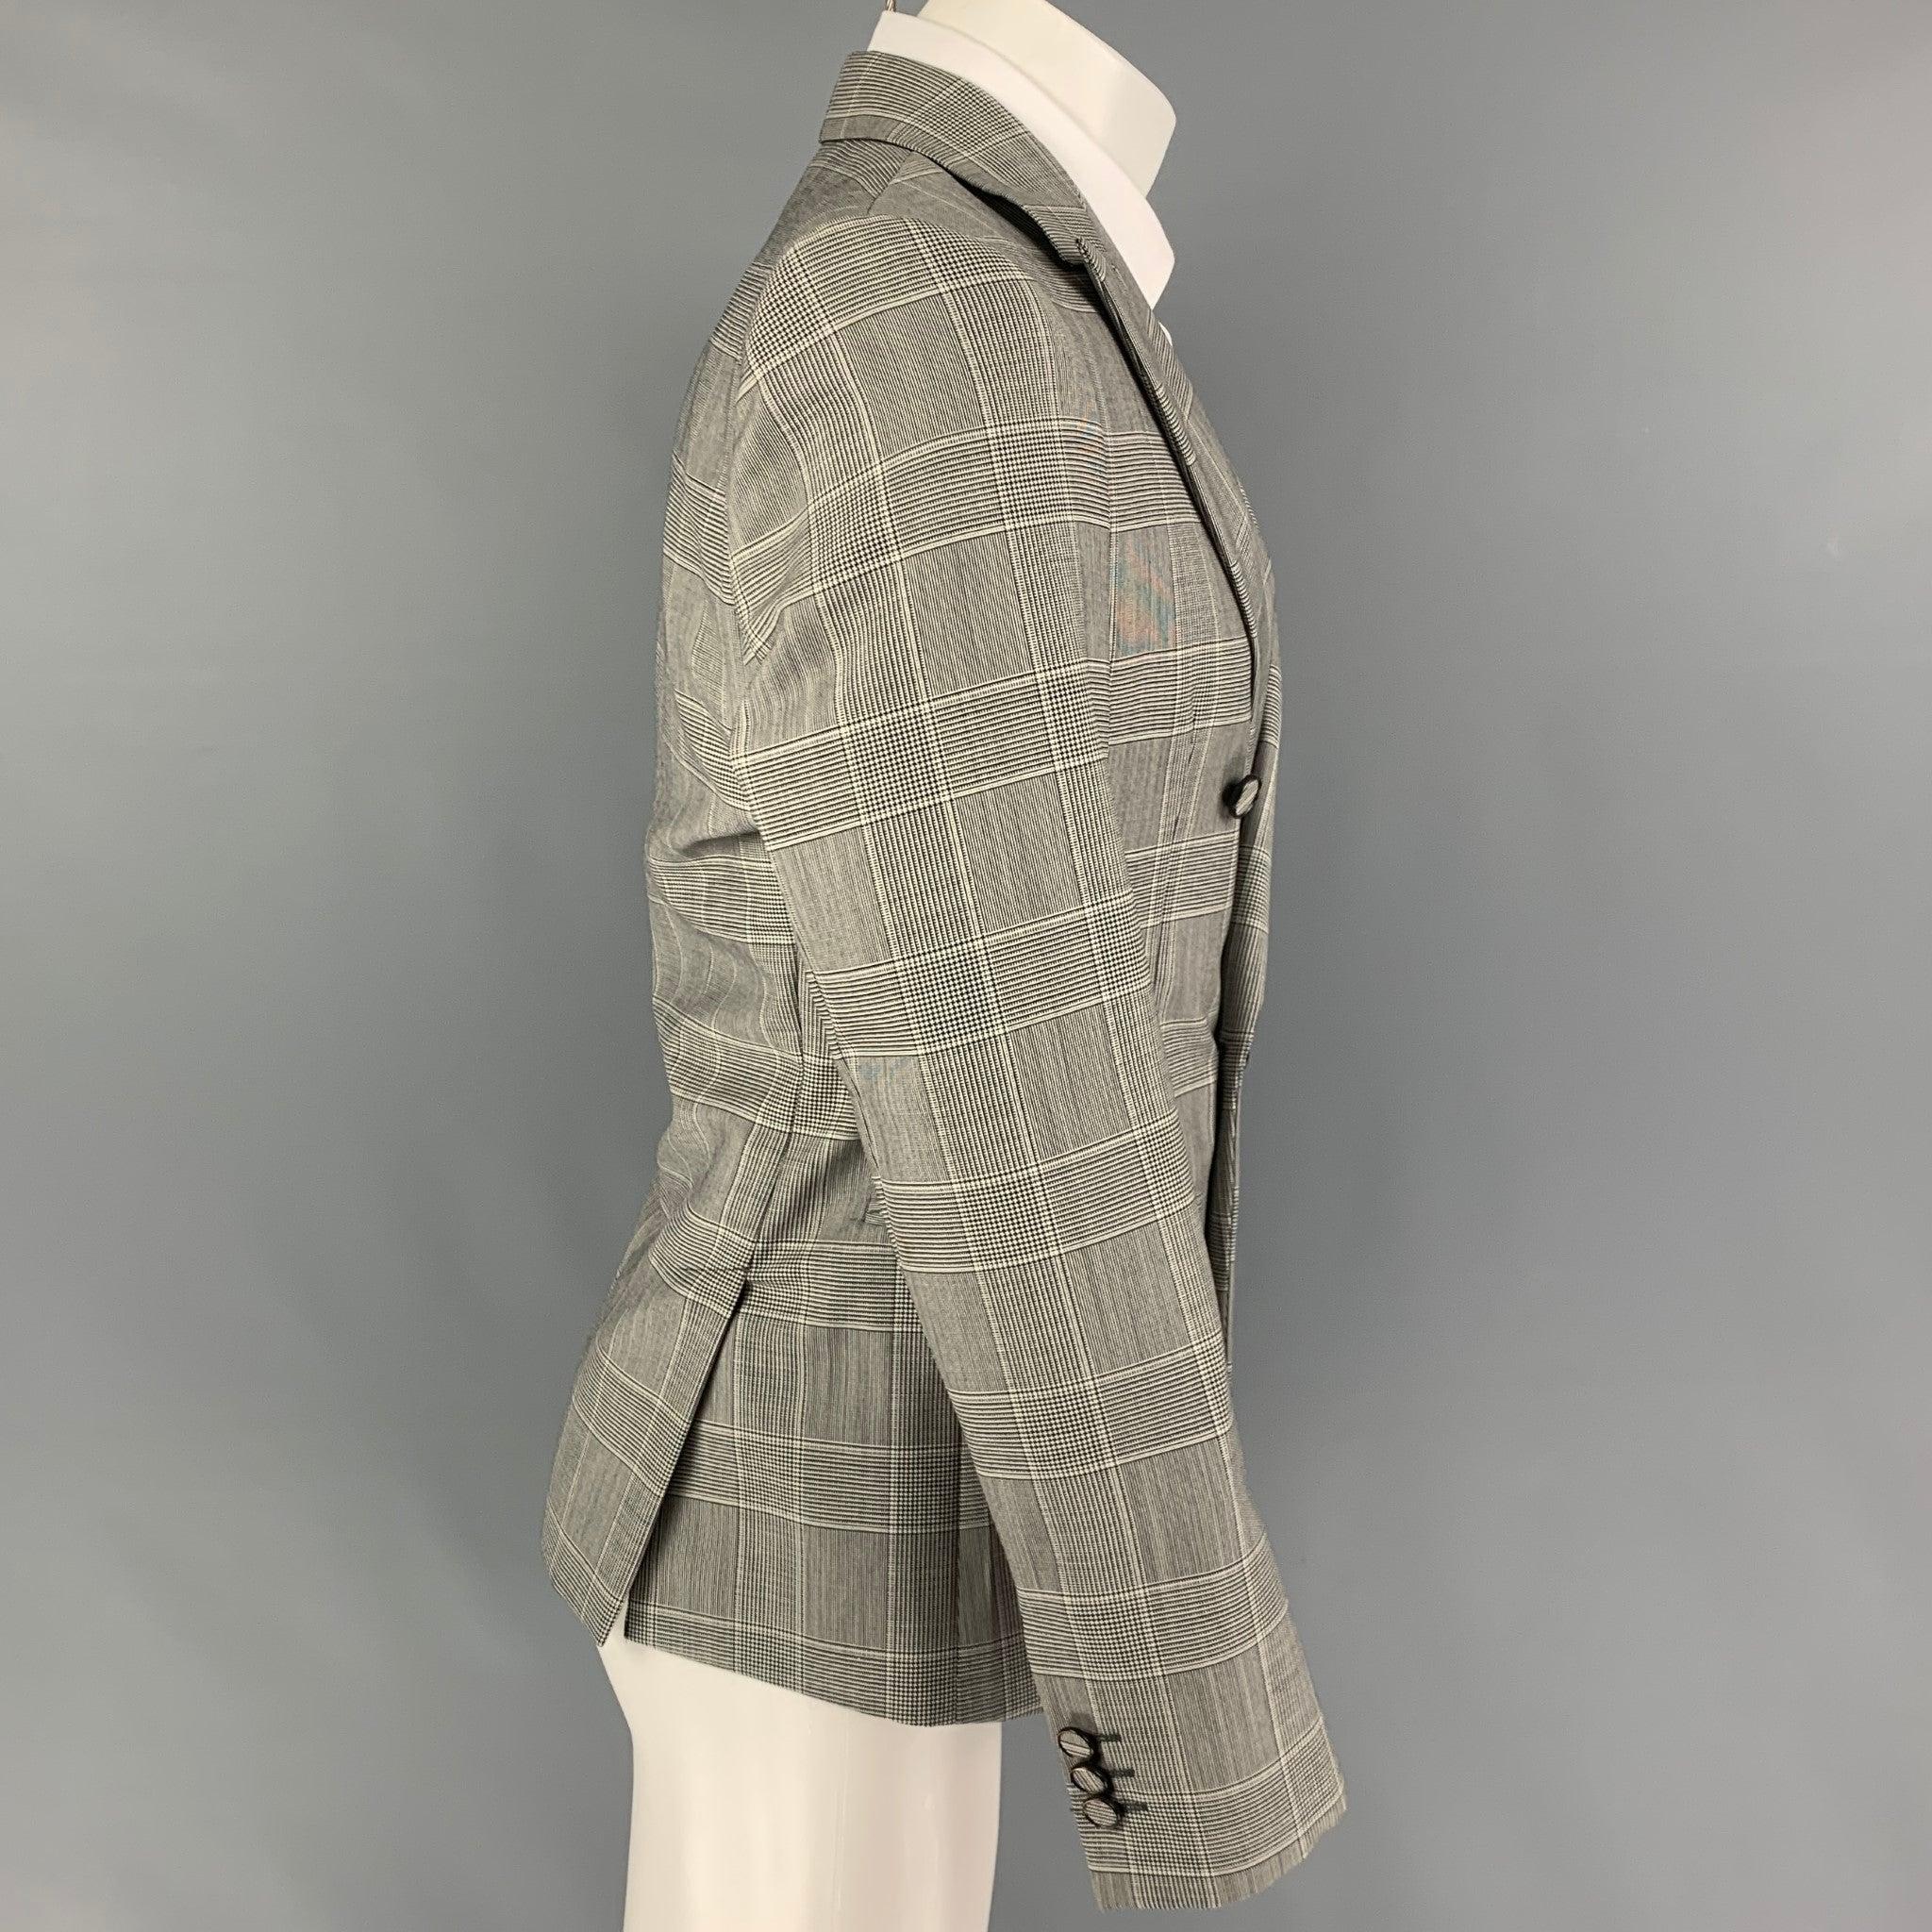 EMPORIO ARMANI
sport coat comes in a black & white glenplaid wool with a full liner featuring a peak lapel, slit pockets, double back vent, and a double breasted closure.
Made in Italy.Very Good Pre-Owned Condition.  

Marked:   48 

Measurements: 
